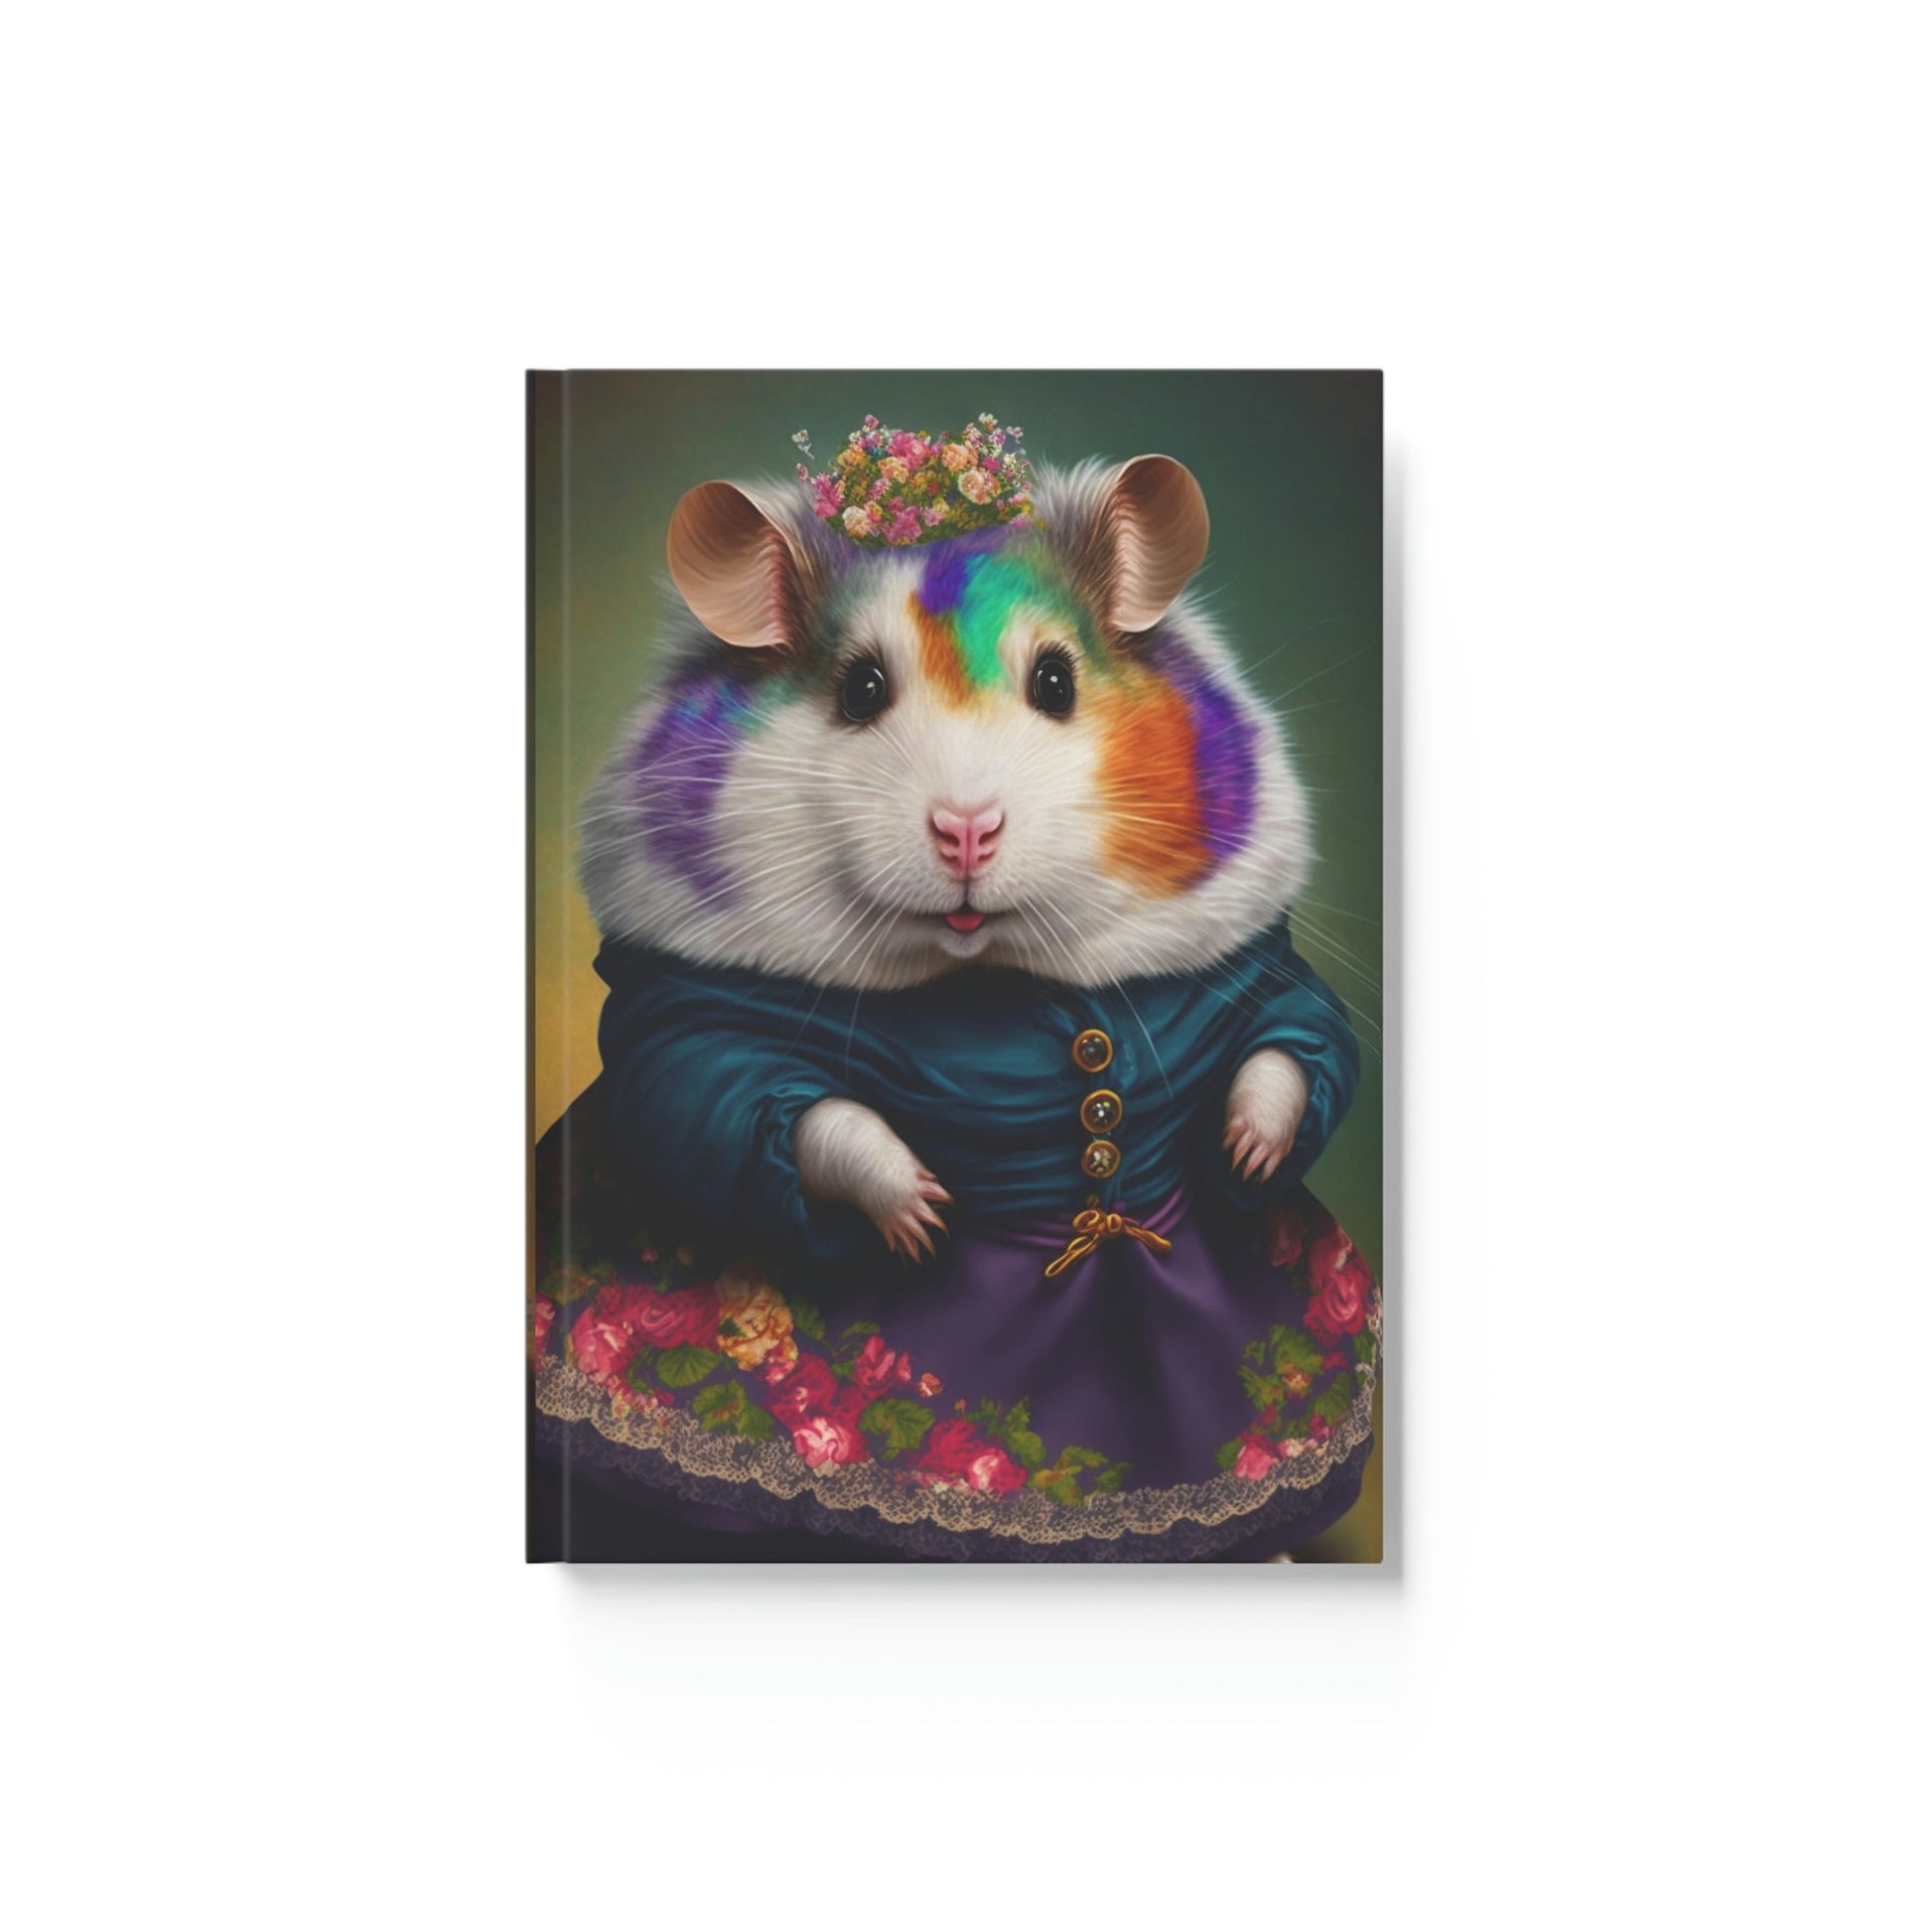 Hamster "Ready for the Evening" Hard Backed Journal